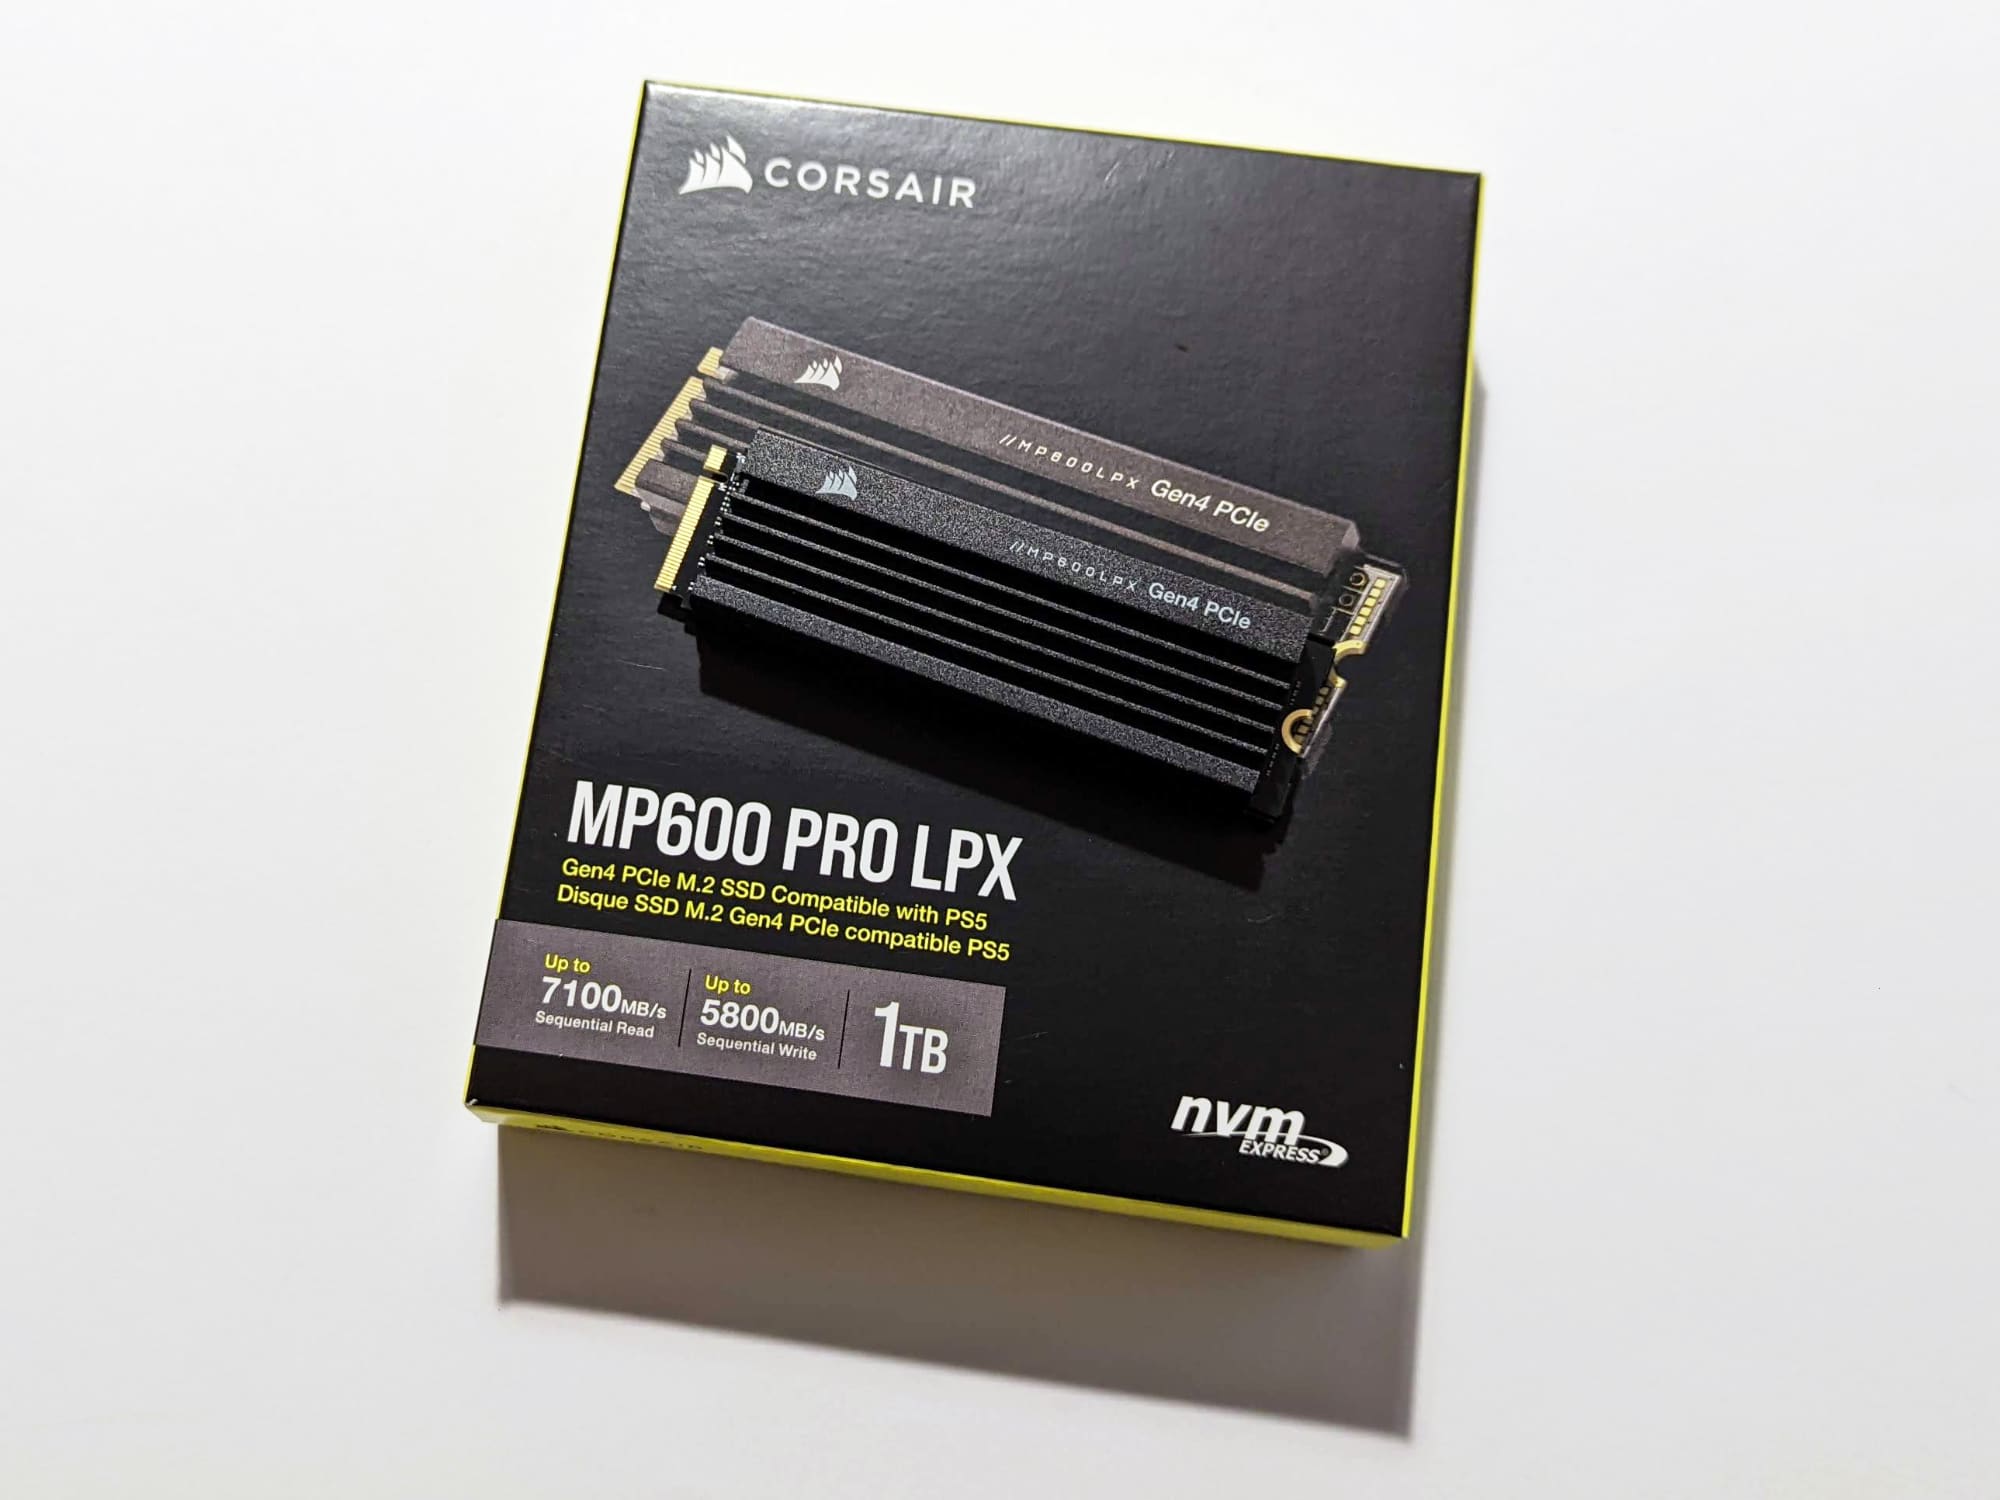 MP600 Pro LPX in review - Corsair's fastest SSD is now also PS5 compatible